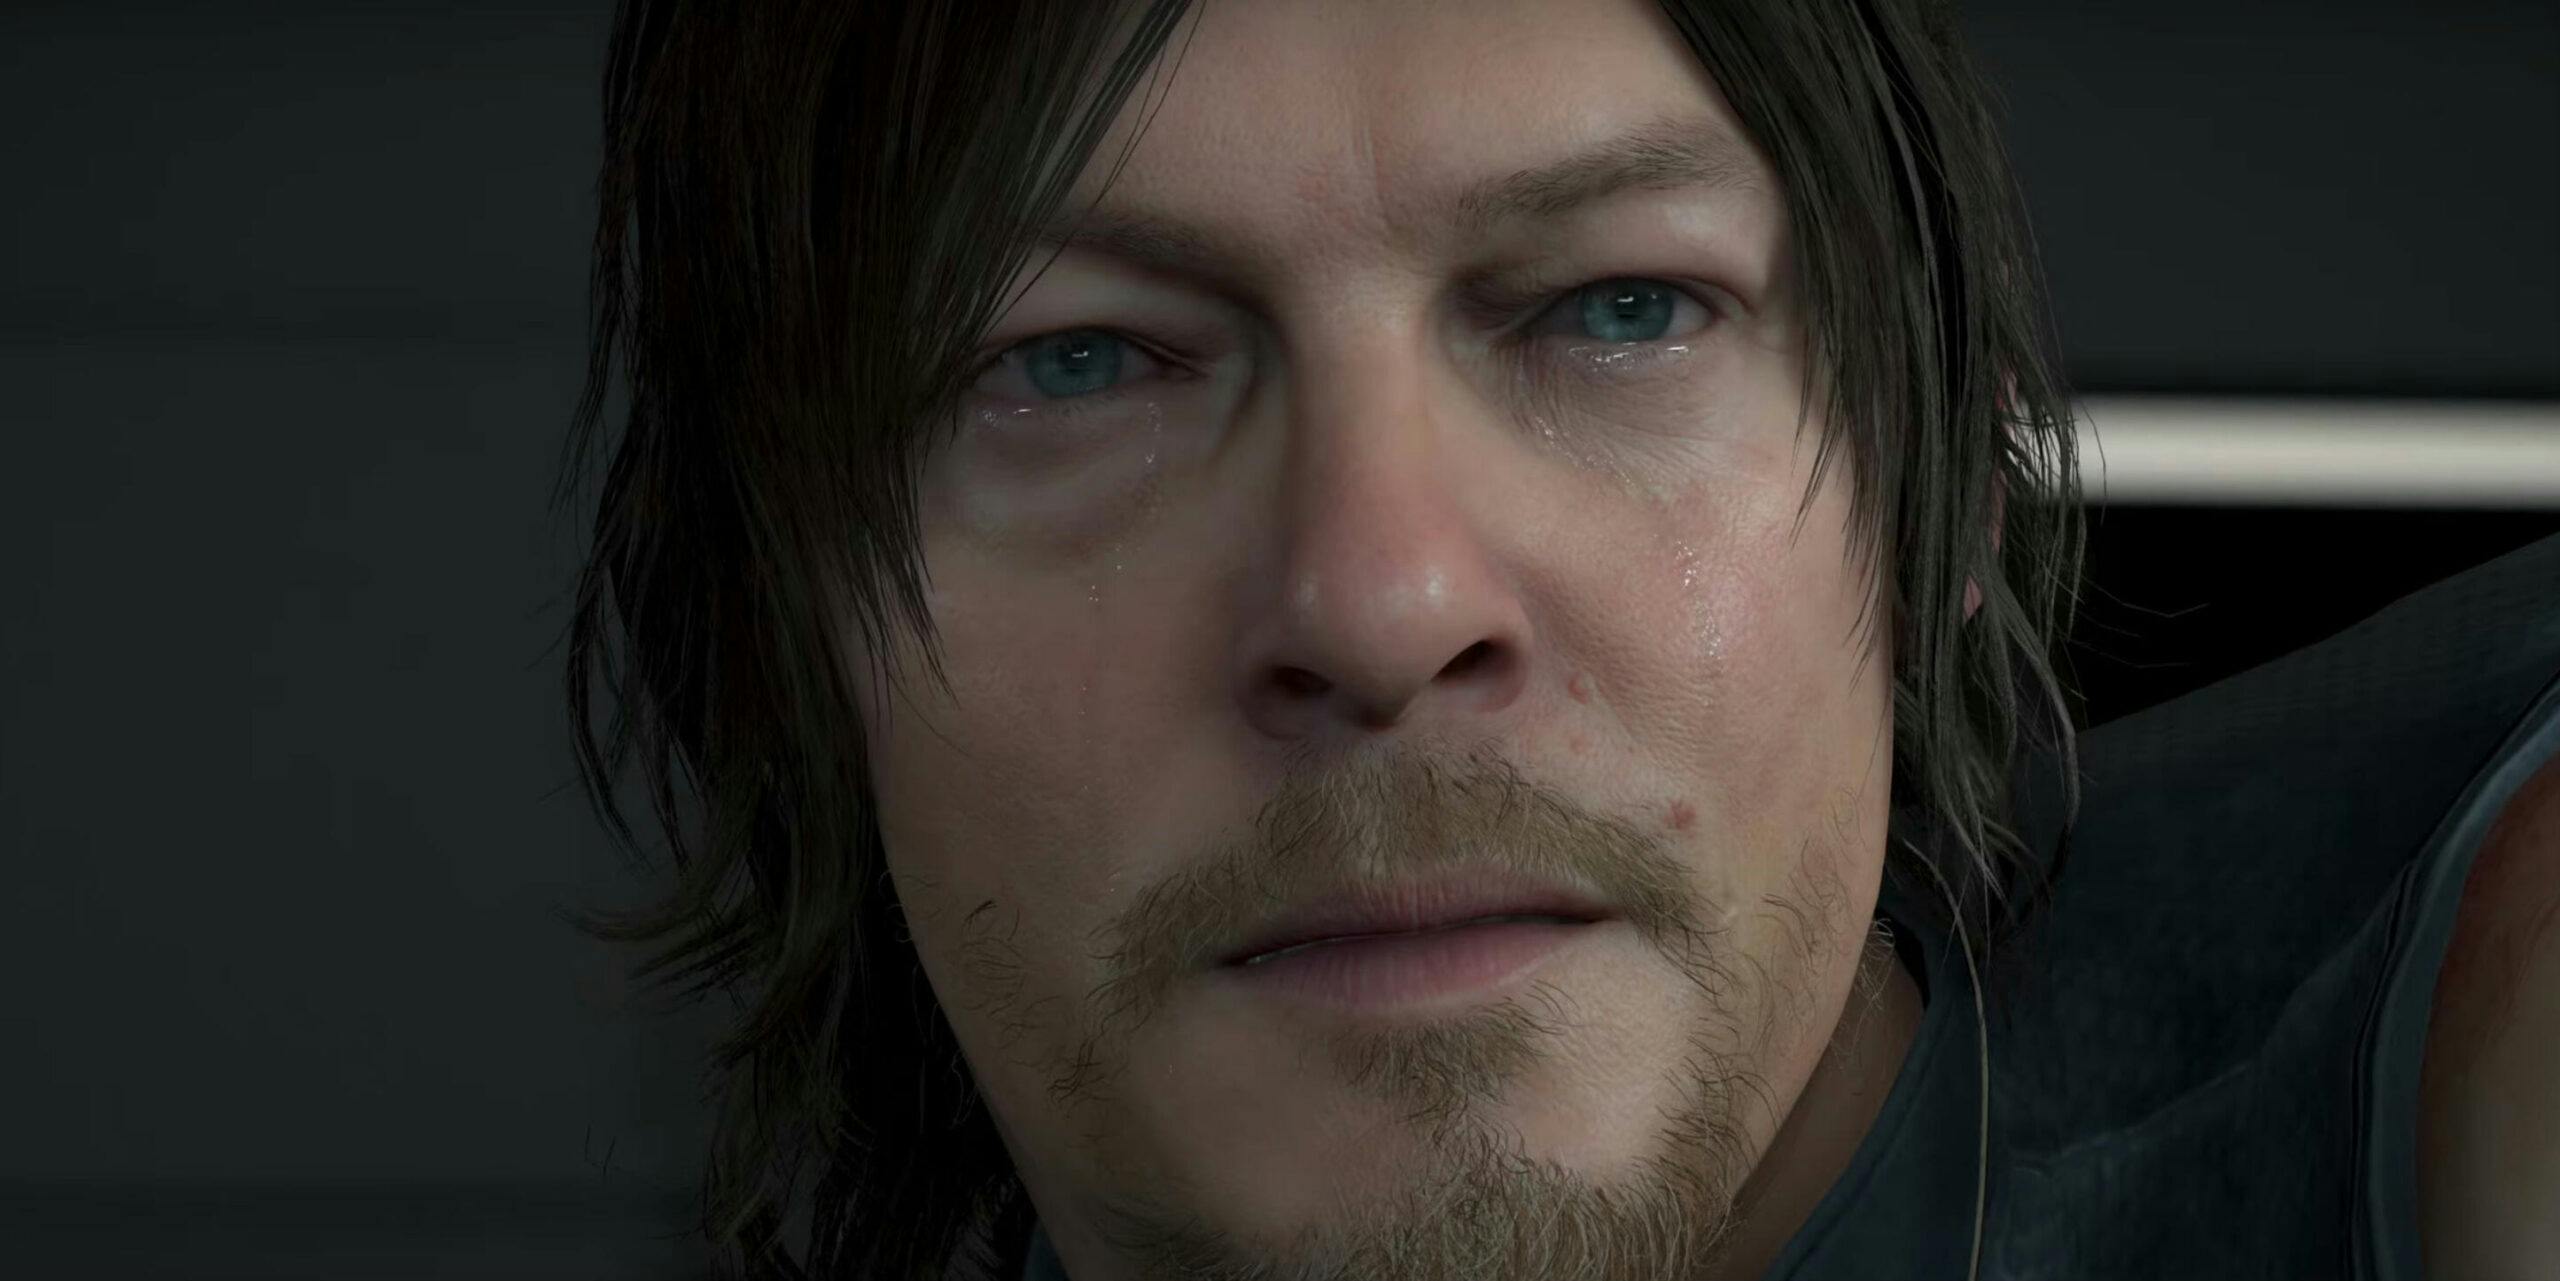 10 things we learned from the new Death Stranding trailer